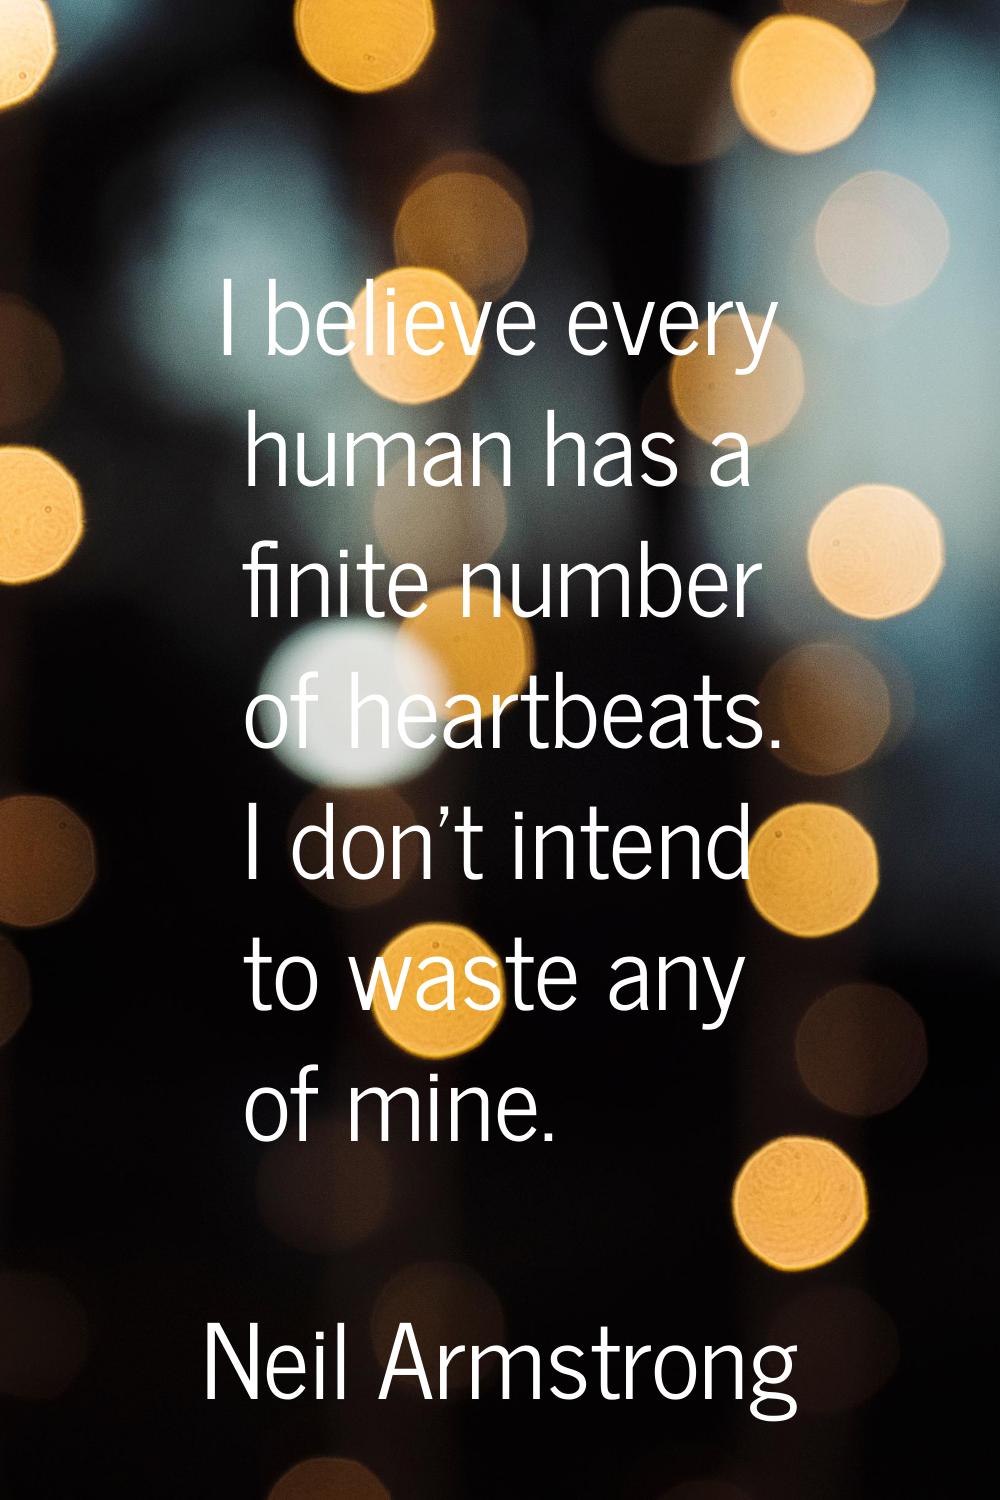 I believe every human has a finite number of heartbeats. I don't intend to waste any of mine.